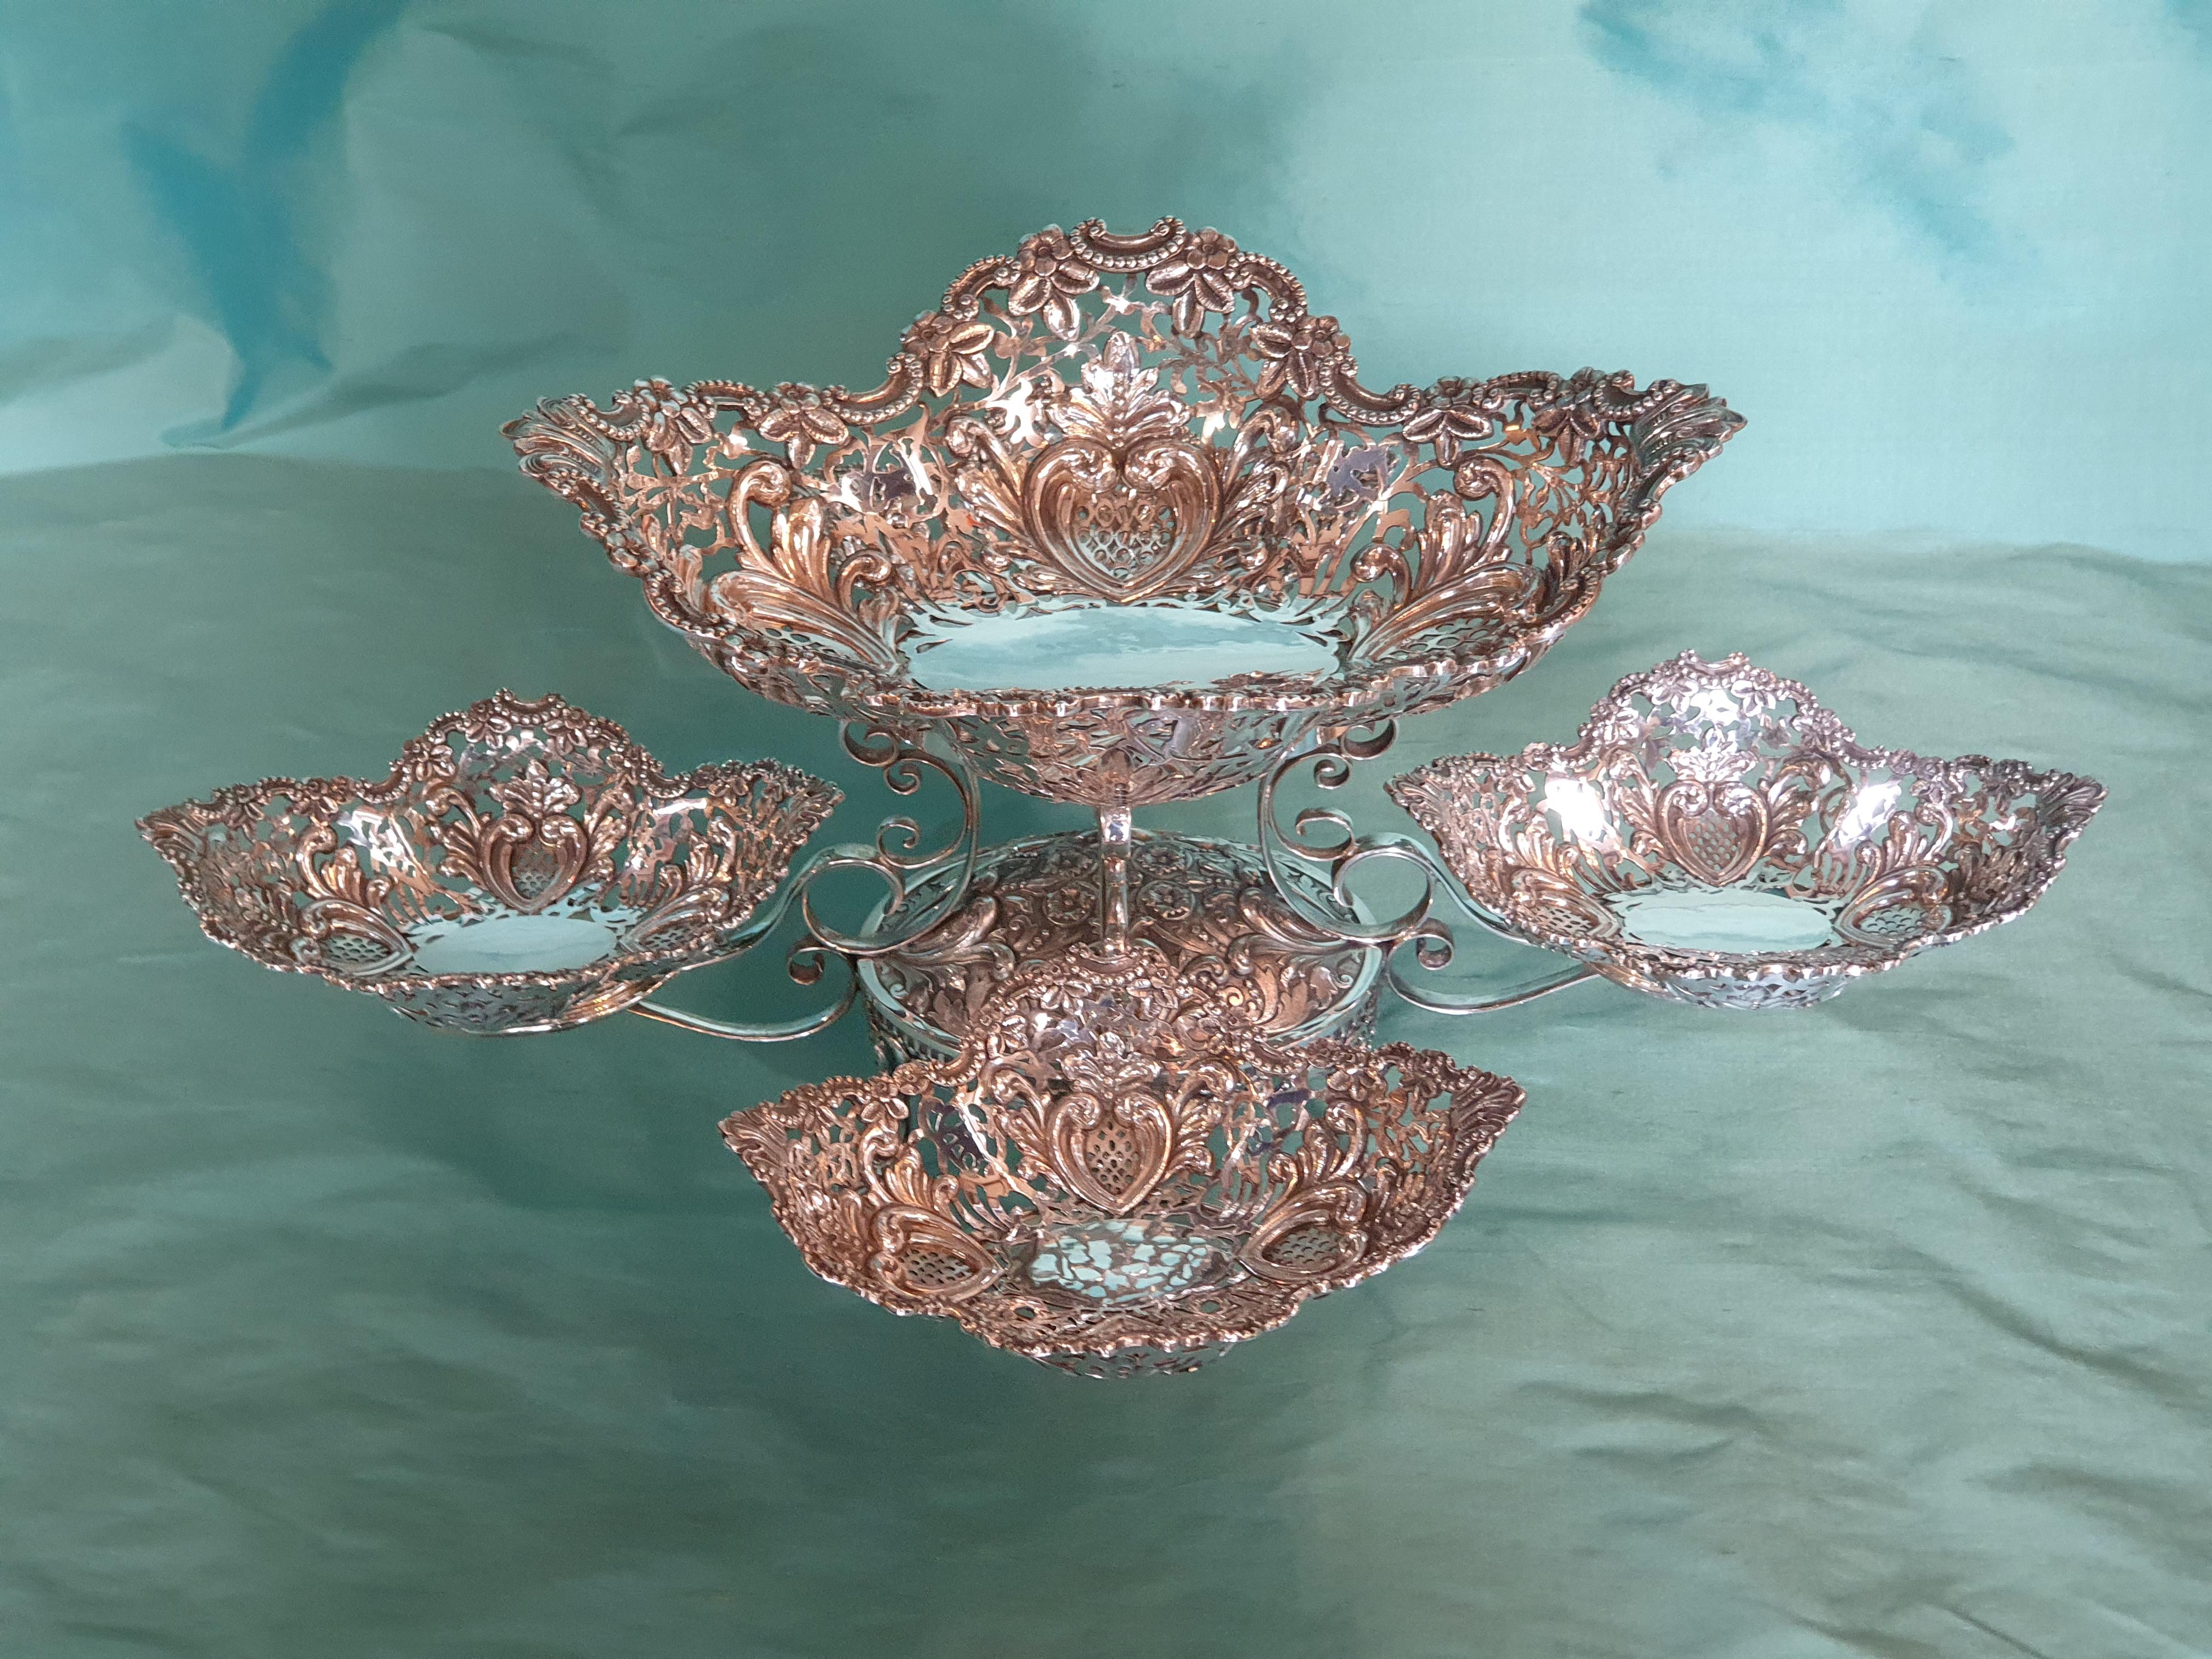 A remarkable Victorian style handcrafted chiseled sterling silver epergne by Italian silversmith Argenteria Auge from Milan. The entire epergne is beautifully embellished with flowers, leaves and hearts.

Epergnes have been a lasting symbol of